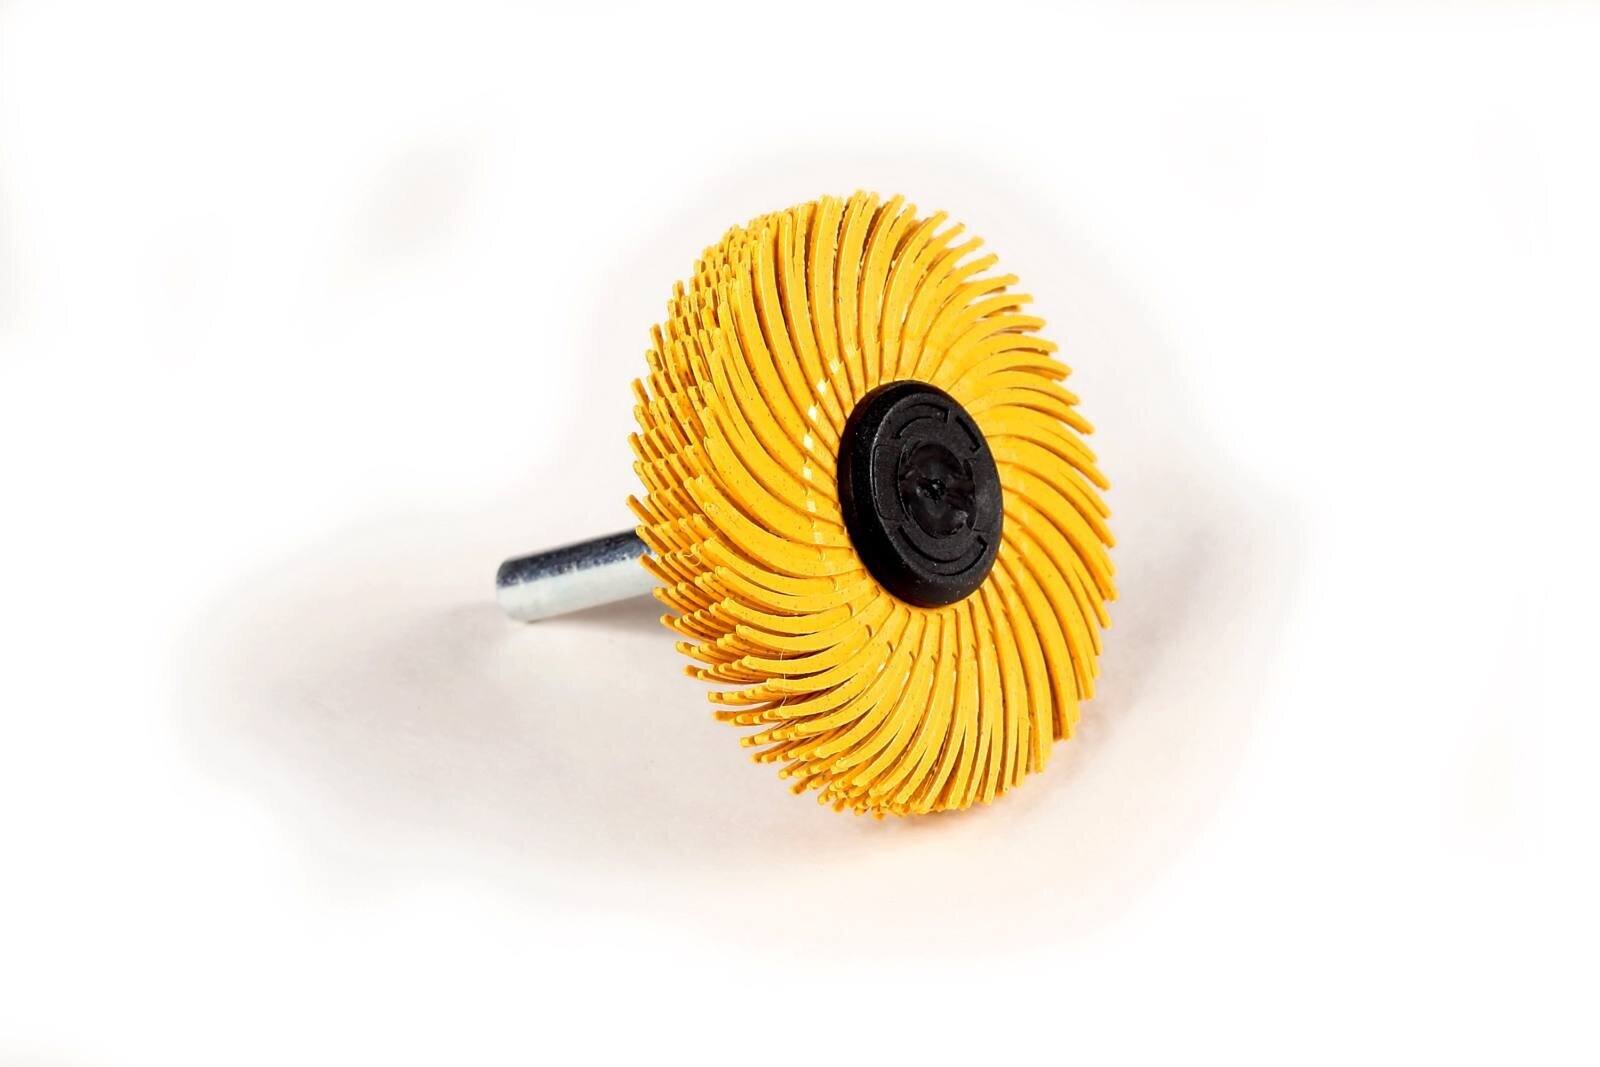 3M Scotch-Brite Radial Bristle Disc BB-ZS with shaft, yellow, 50.8 mm, P80, type C #62965